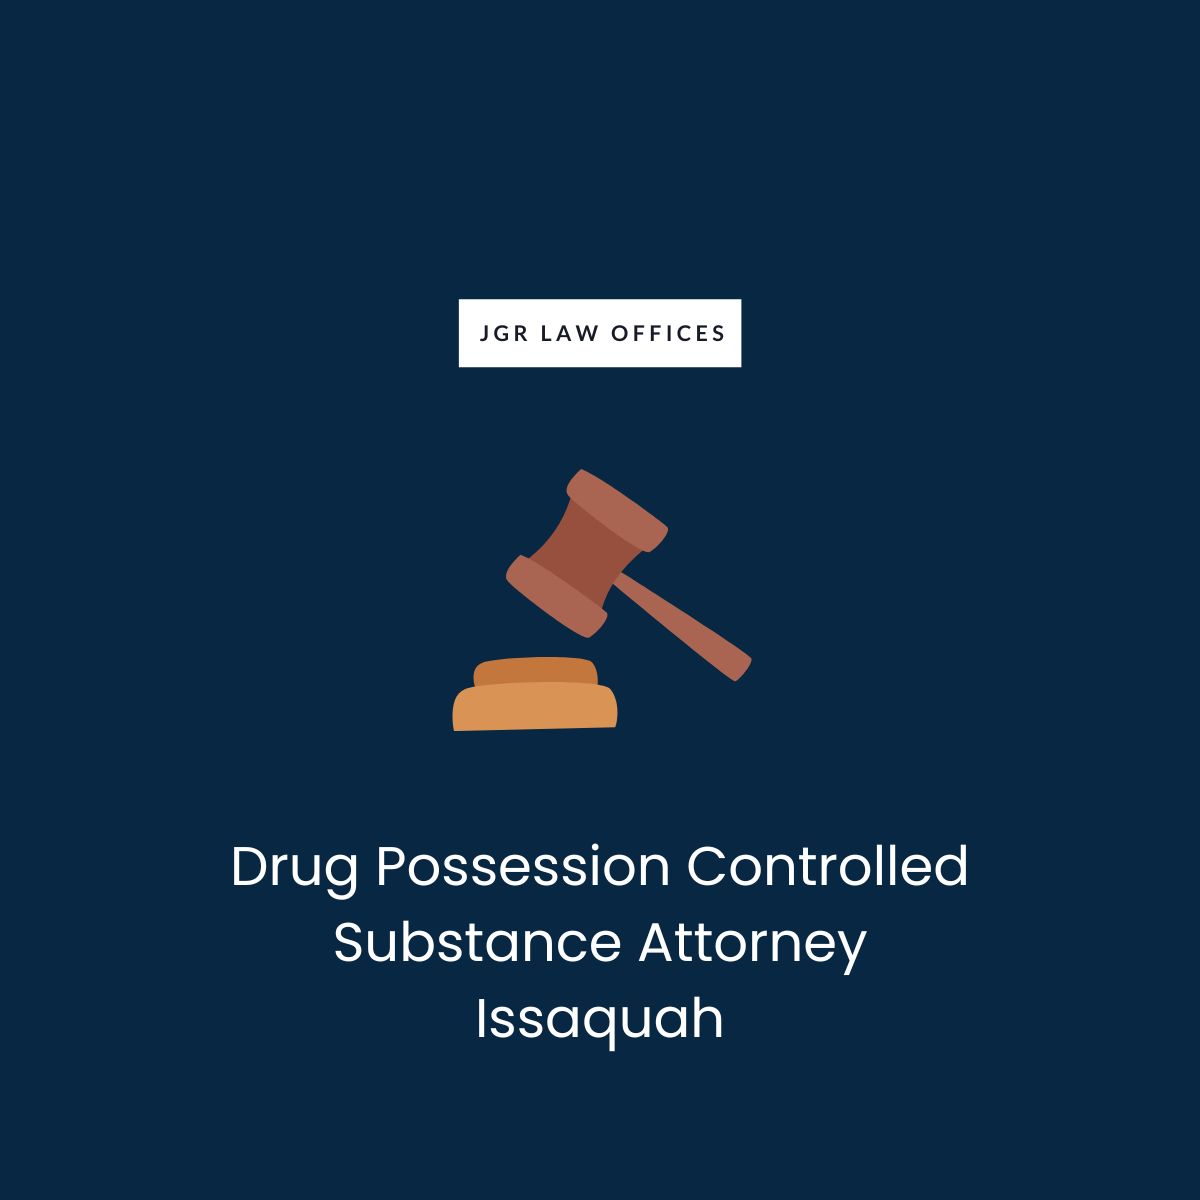 Drug Possession Controlled Substance Lawyer Issaquah Drug Possession Controlled Substance Drug Possession Controlled Substance